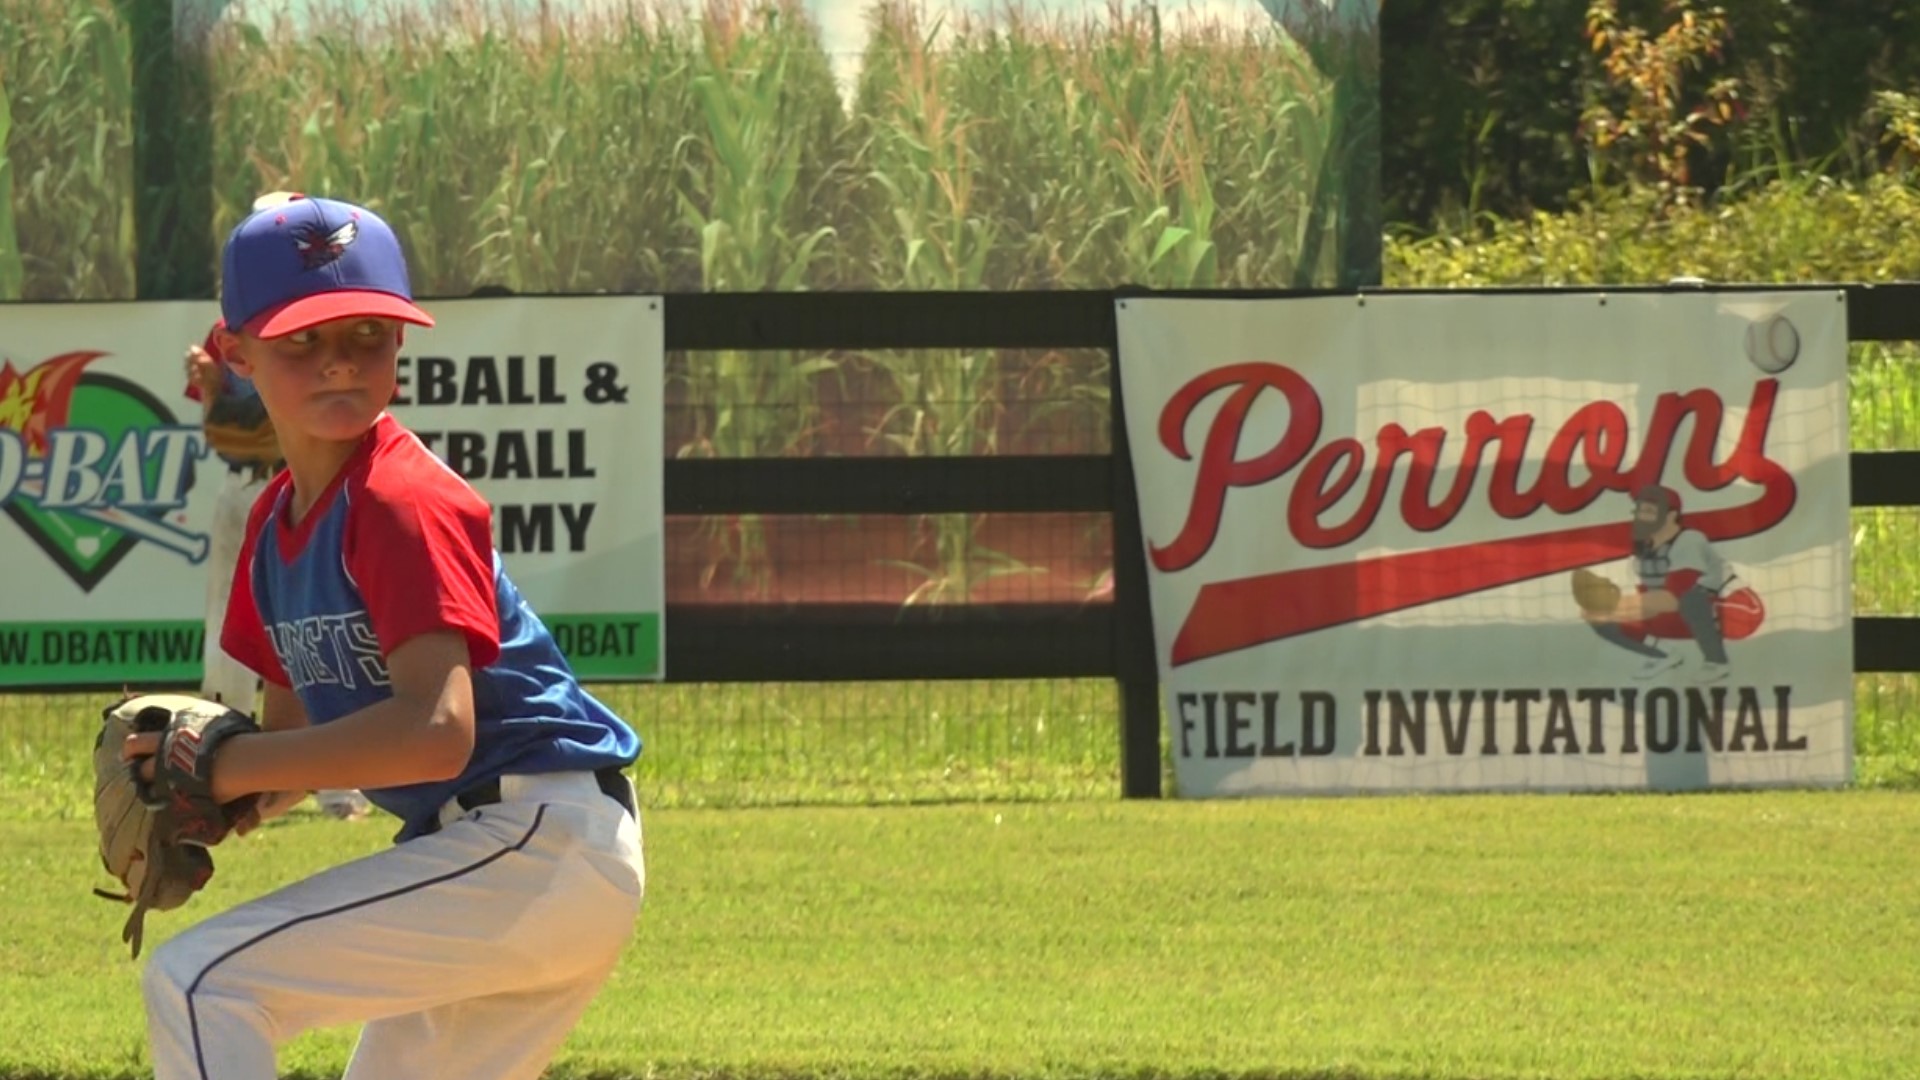 Sam Perroni built a baseball field in his backyard and now hosts tournaments to raise money for Alzheimer's research.